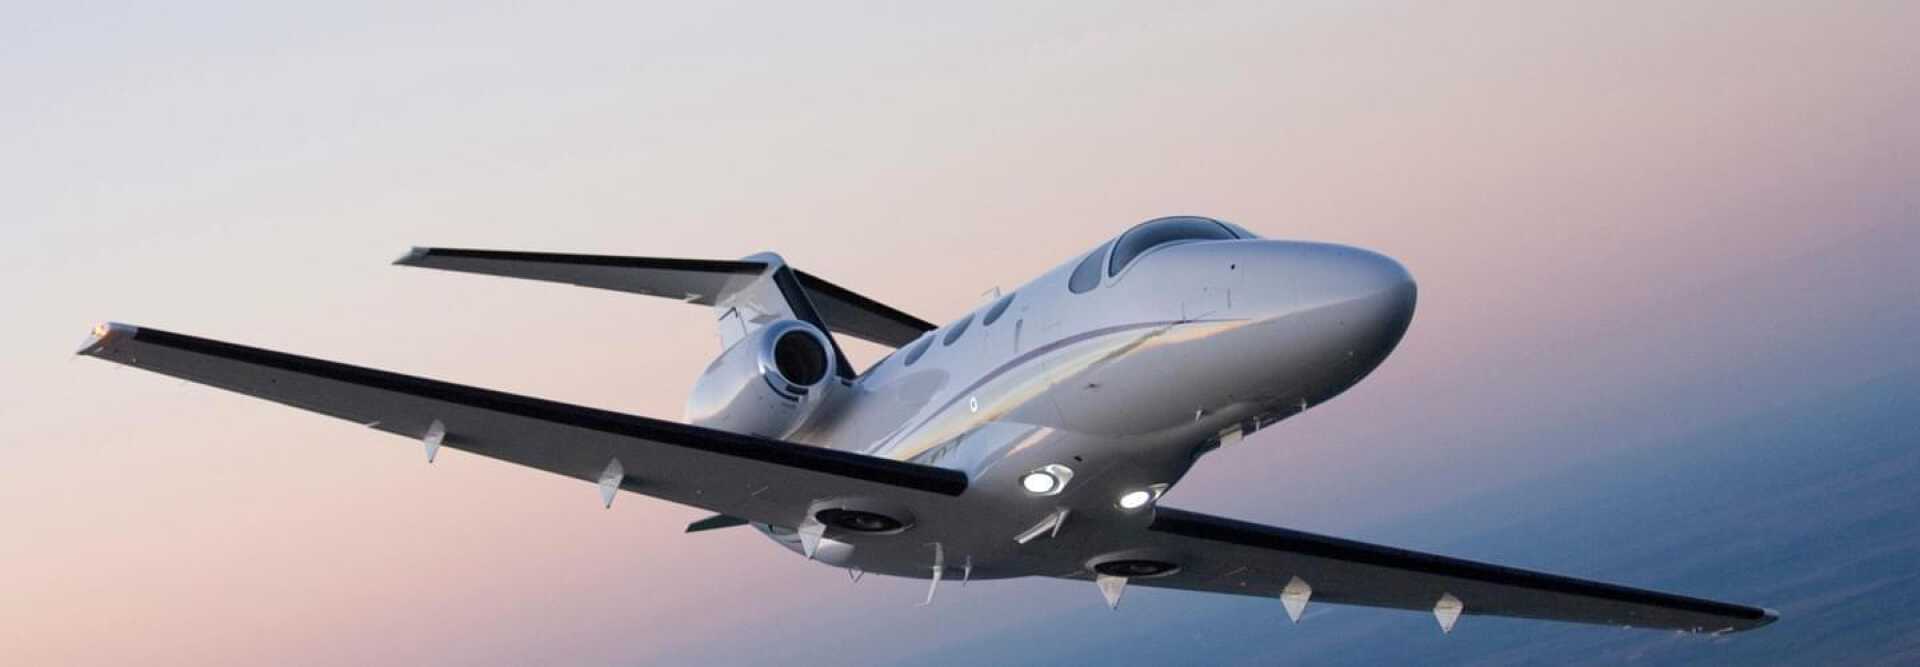 Very Light Jet Cessna Citation Mustang to charter for private aviation with LunaJets for intra-European short-haul flights or weekend getaways